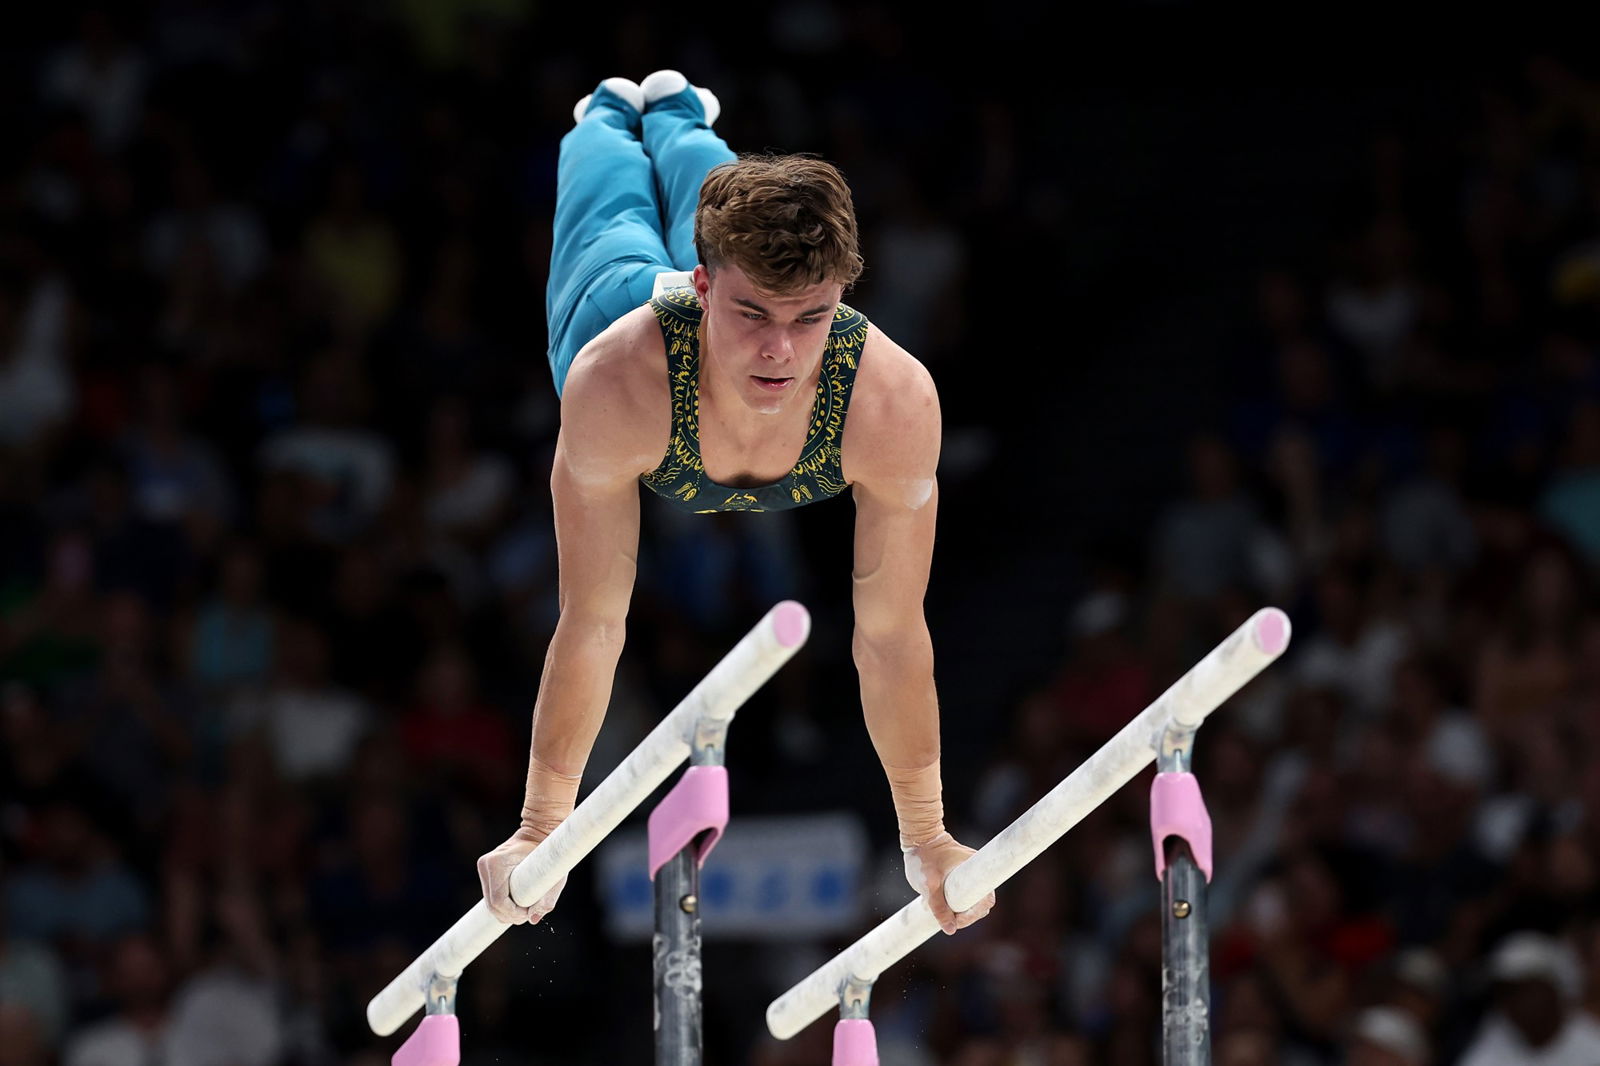  Jesse Moore has two hands on the parallel bars and his legs in the air behind him.